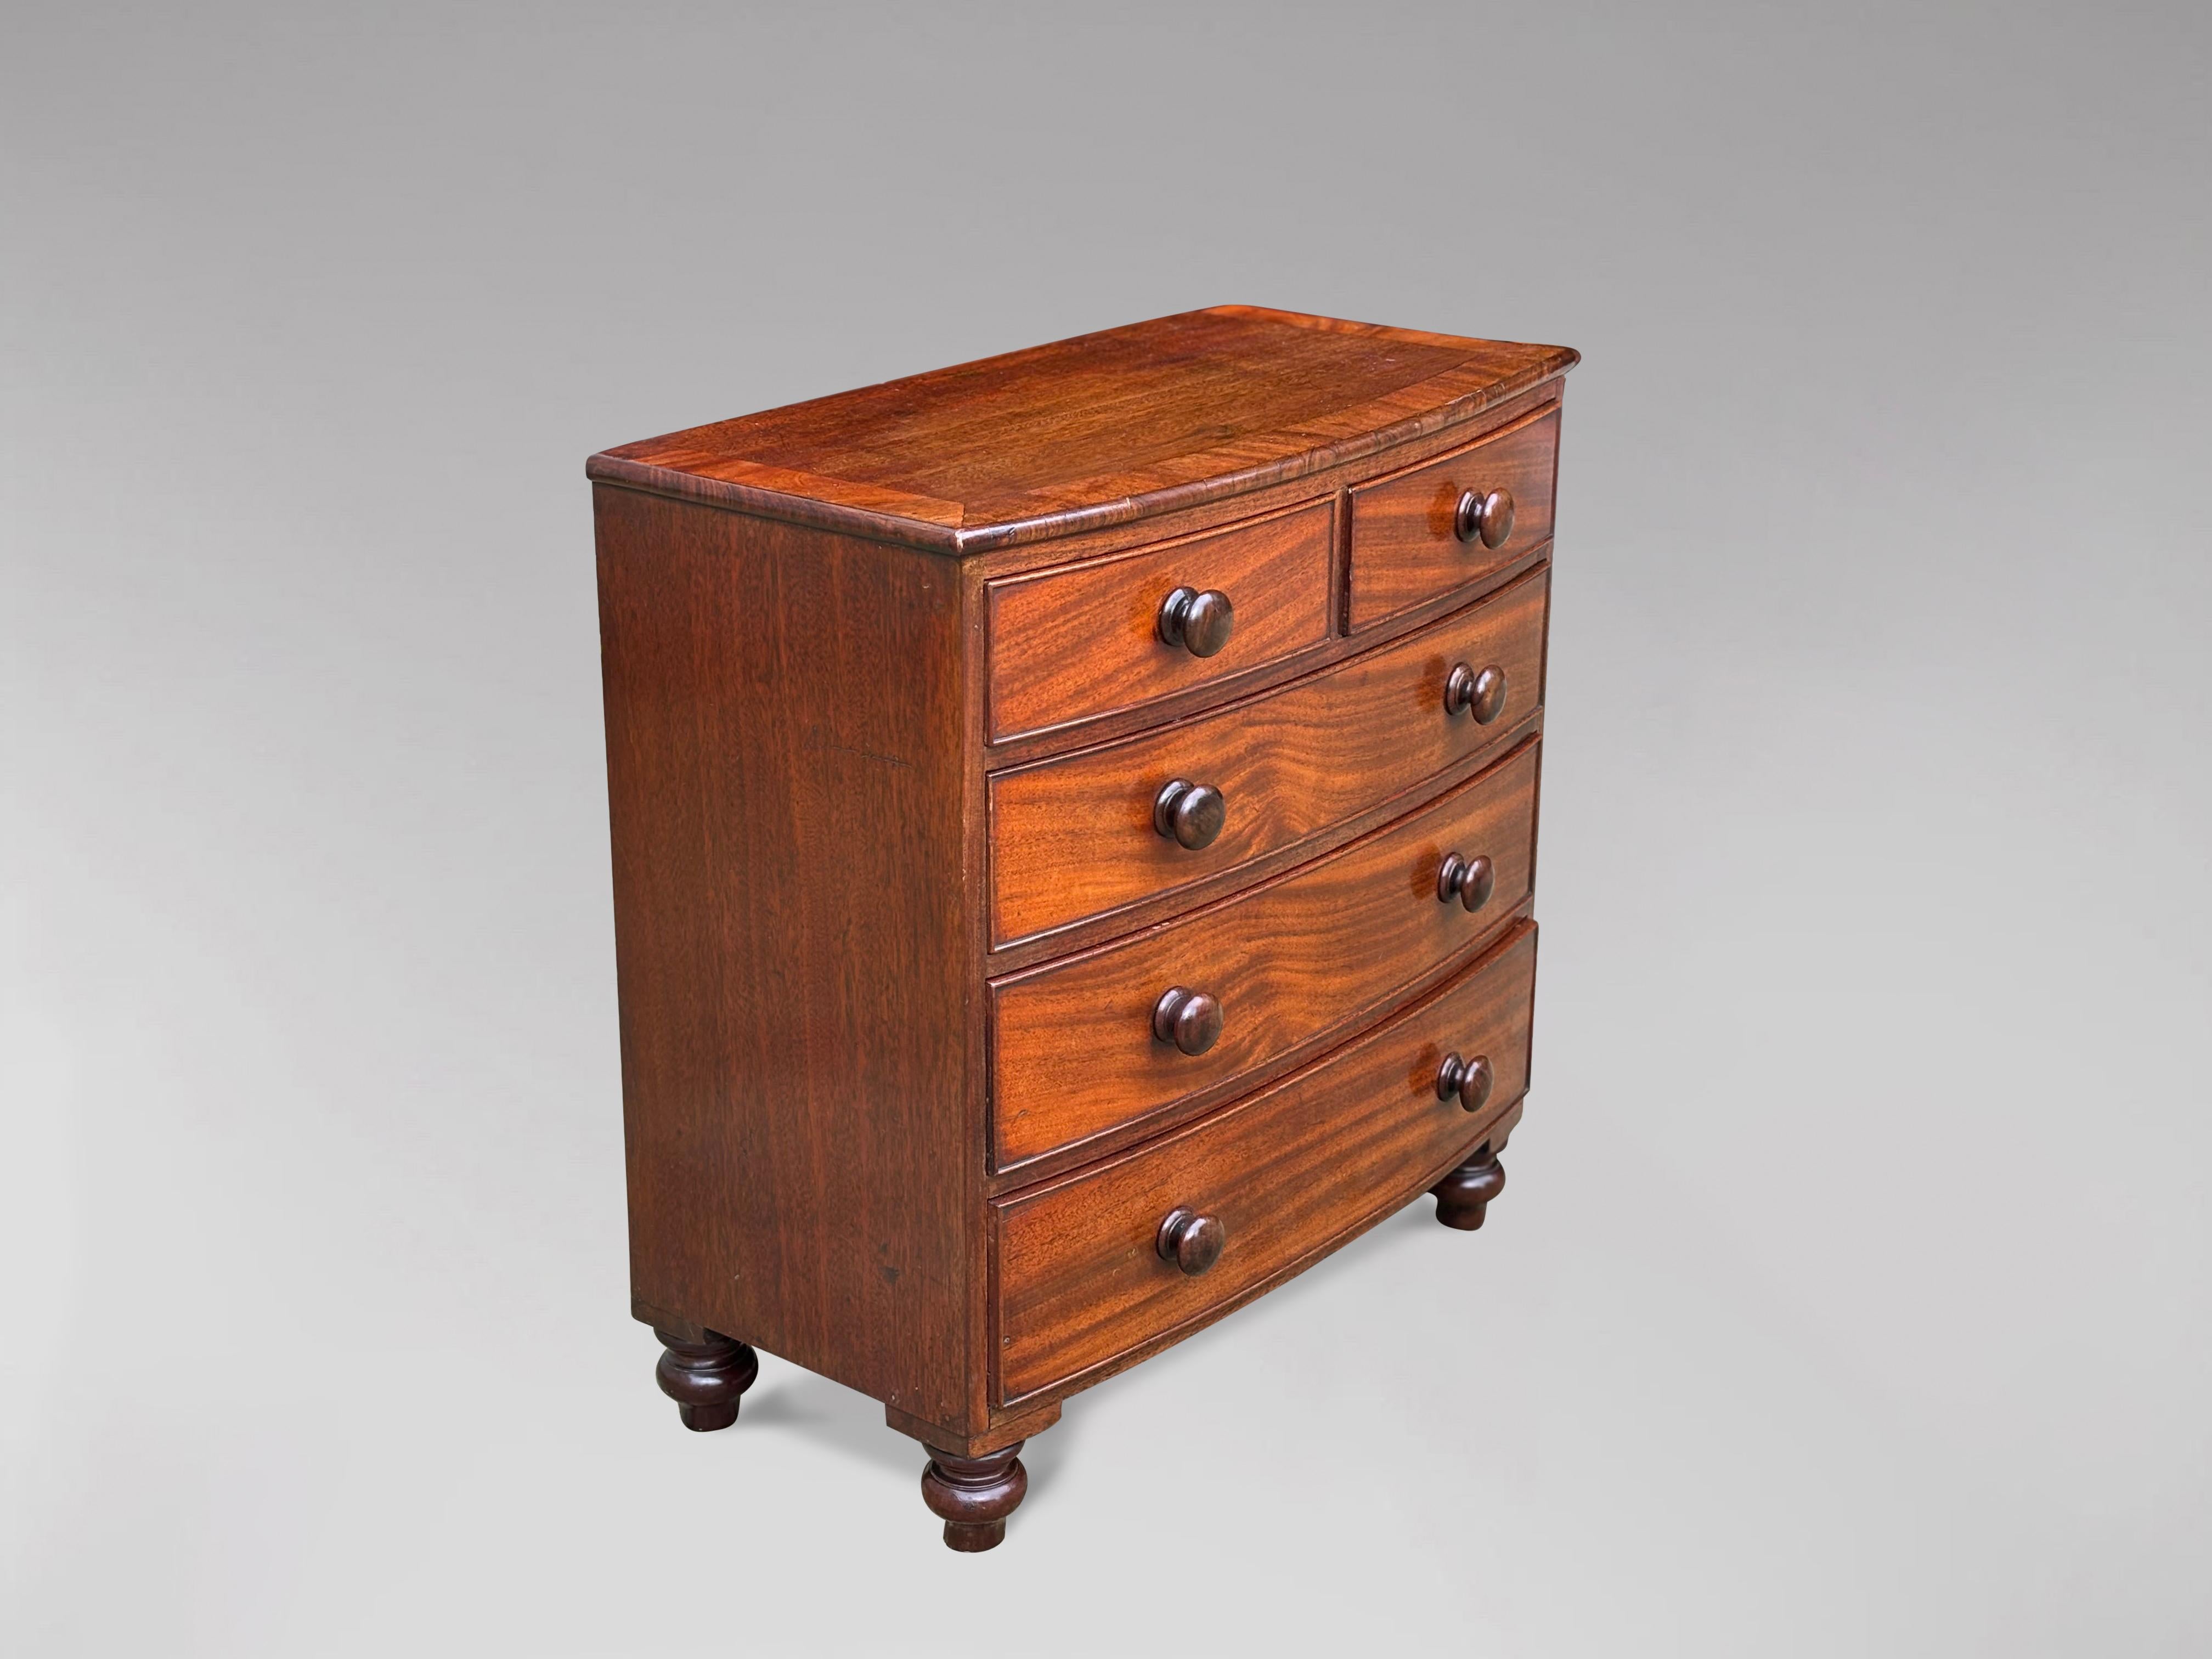 19th Century Miniature Bow Fronted Chest of Drawers In Good Condition For Sale In Petworth,West Sussex, GB